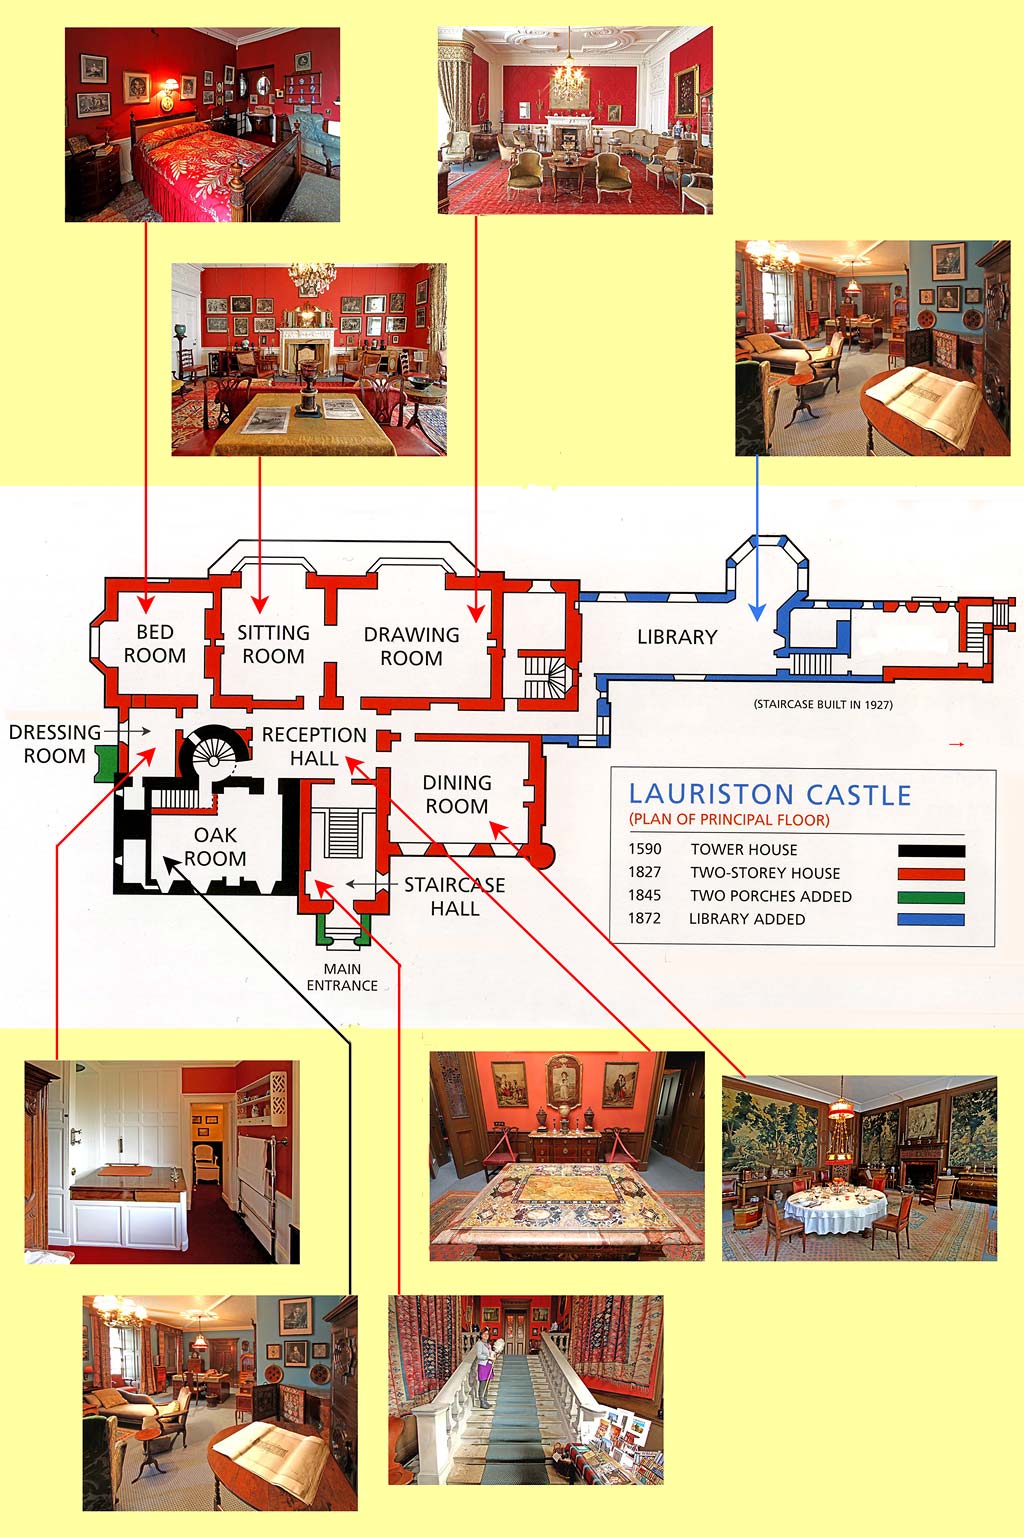 Lauriston Castle - Plan and Photos of the Principal Rooms